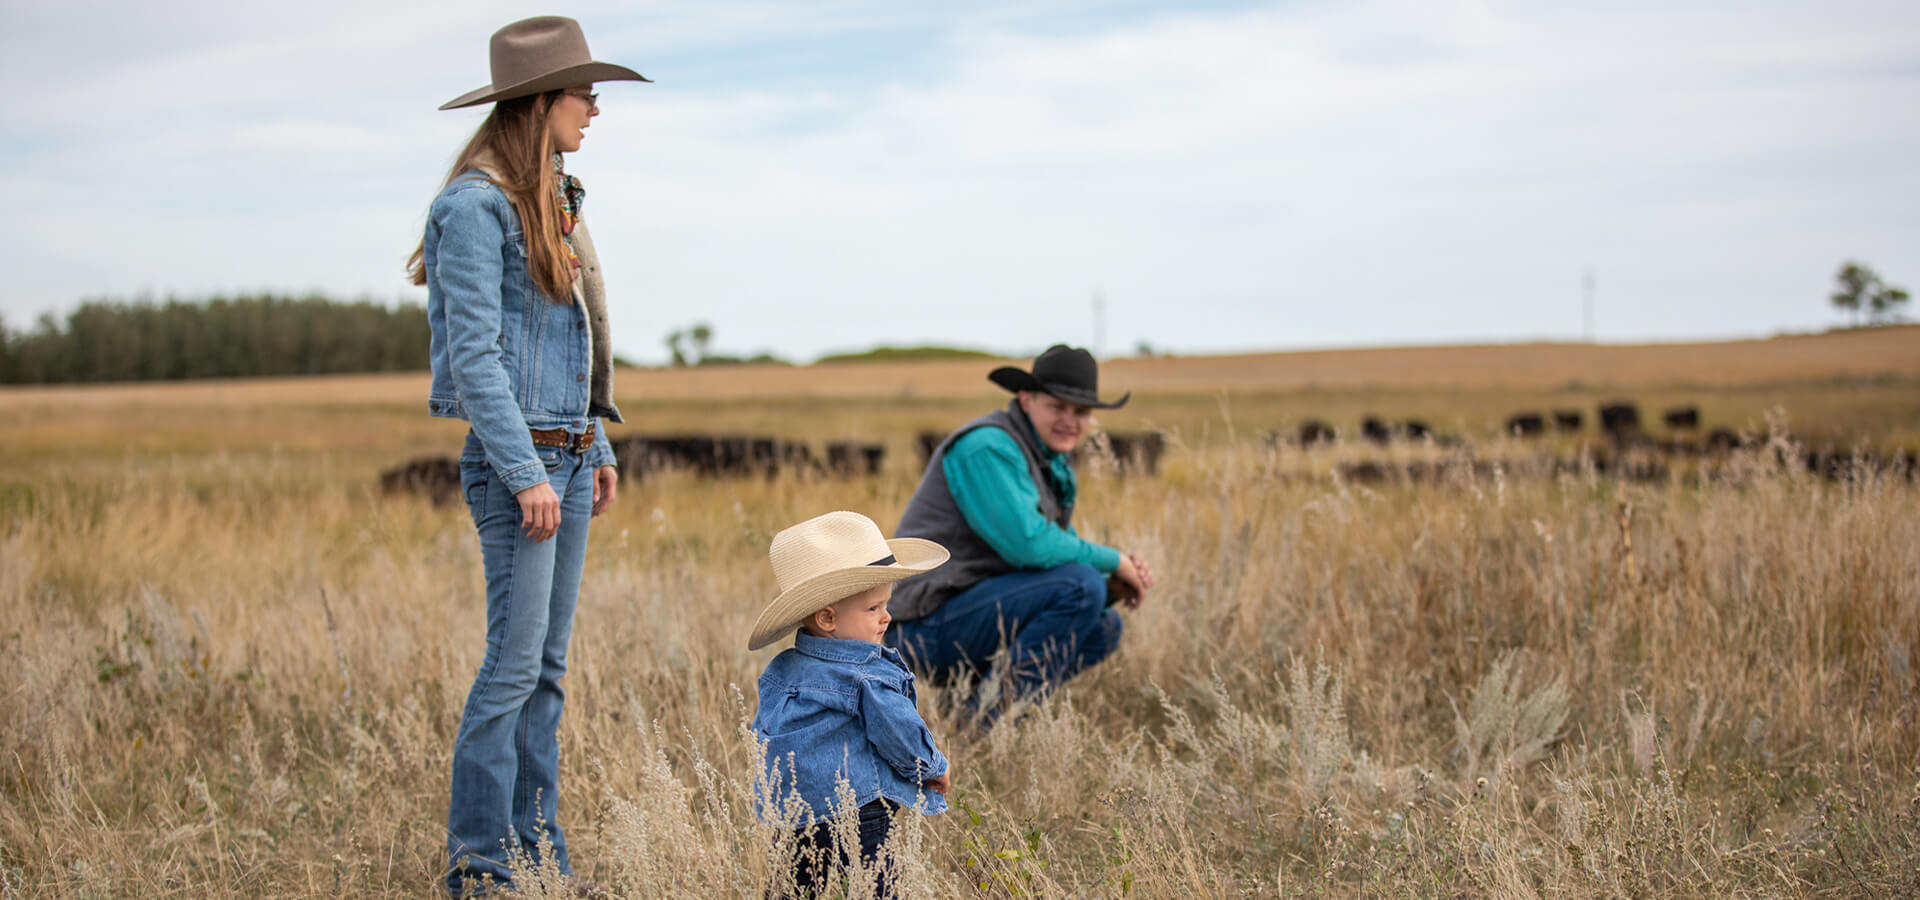 Raising the Standards Inspired thought and responsible action. Rancher in the Field